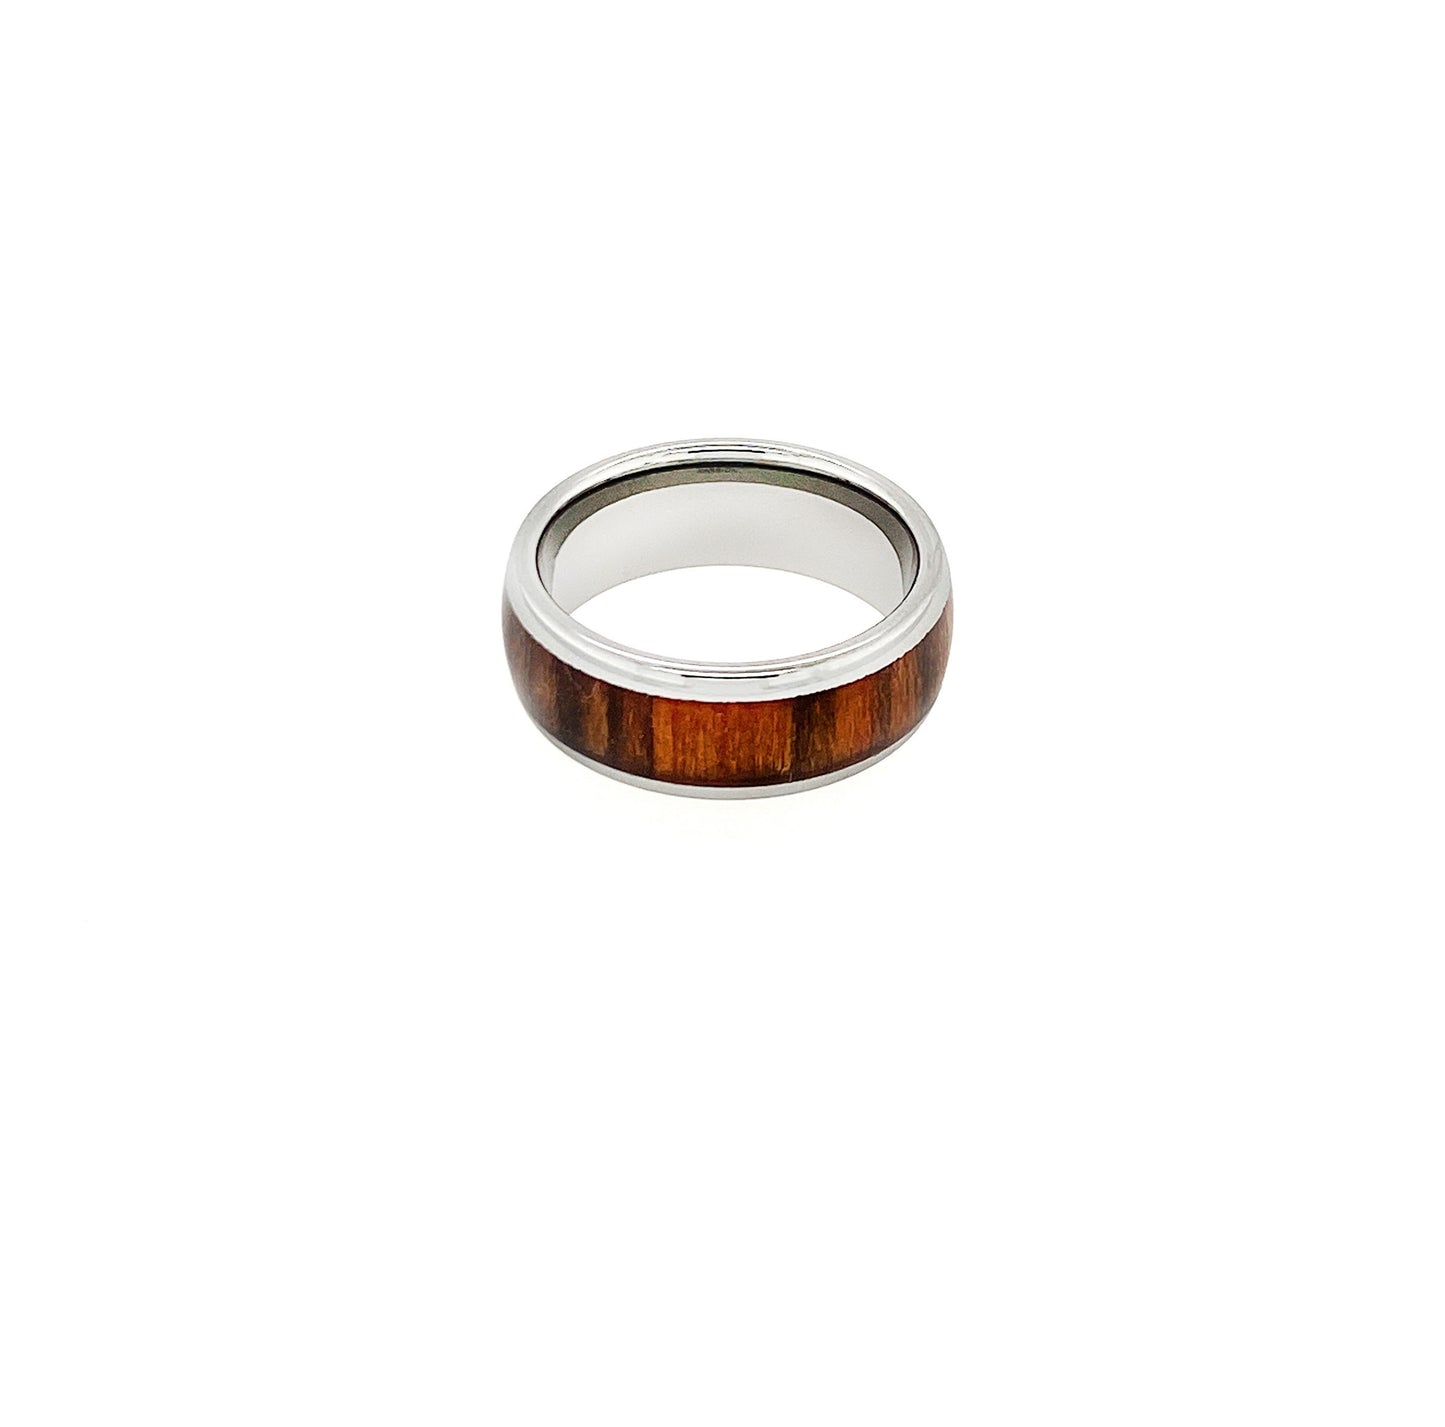 Silver Tungsten with Koa Wood Inlay Ring - Twisted Earth Artistry